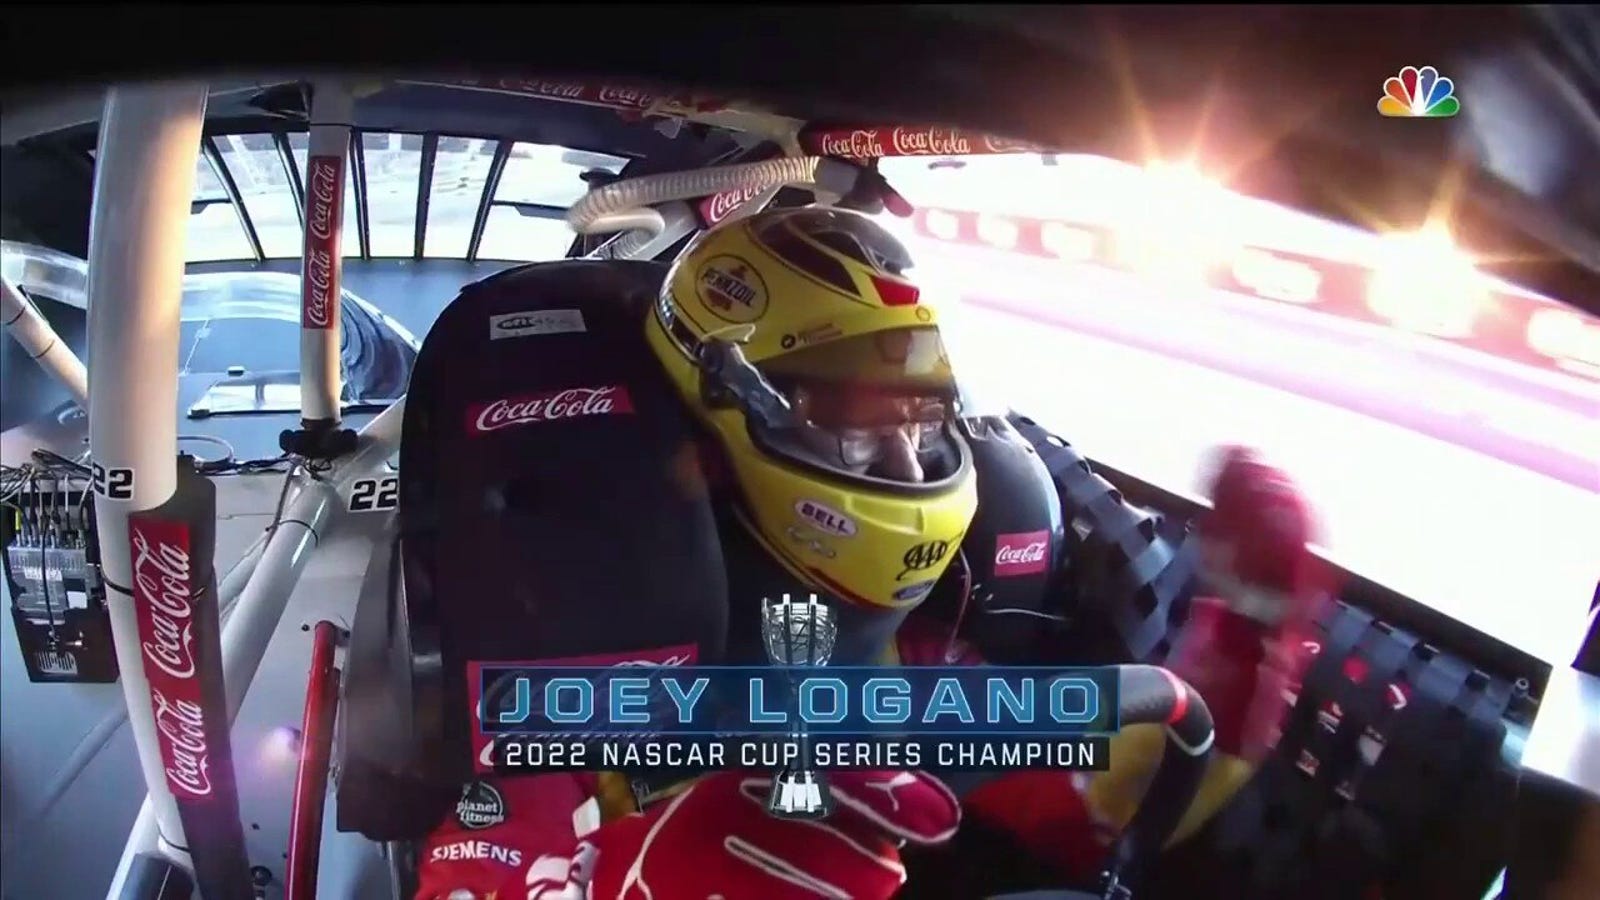 Joey Logano wins the 2022 NASCAR Cup Series championship